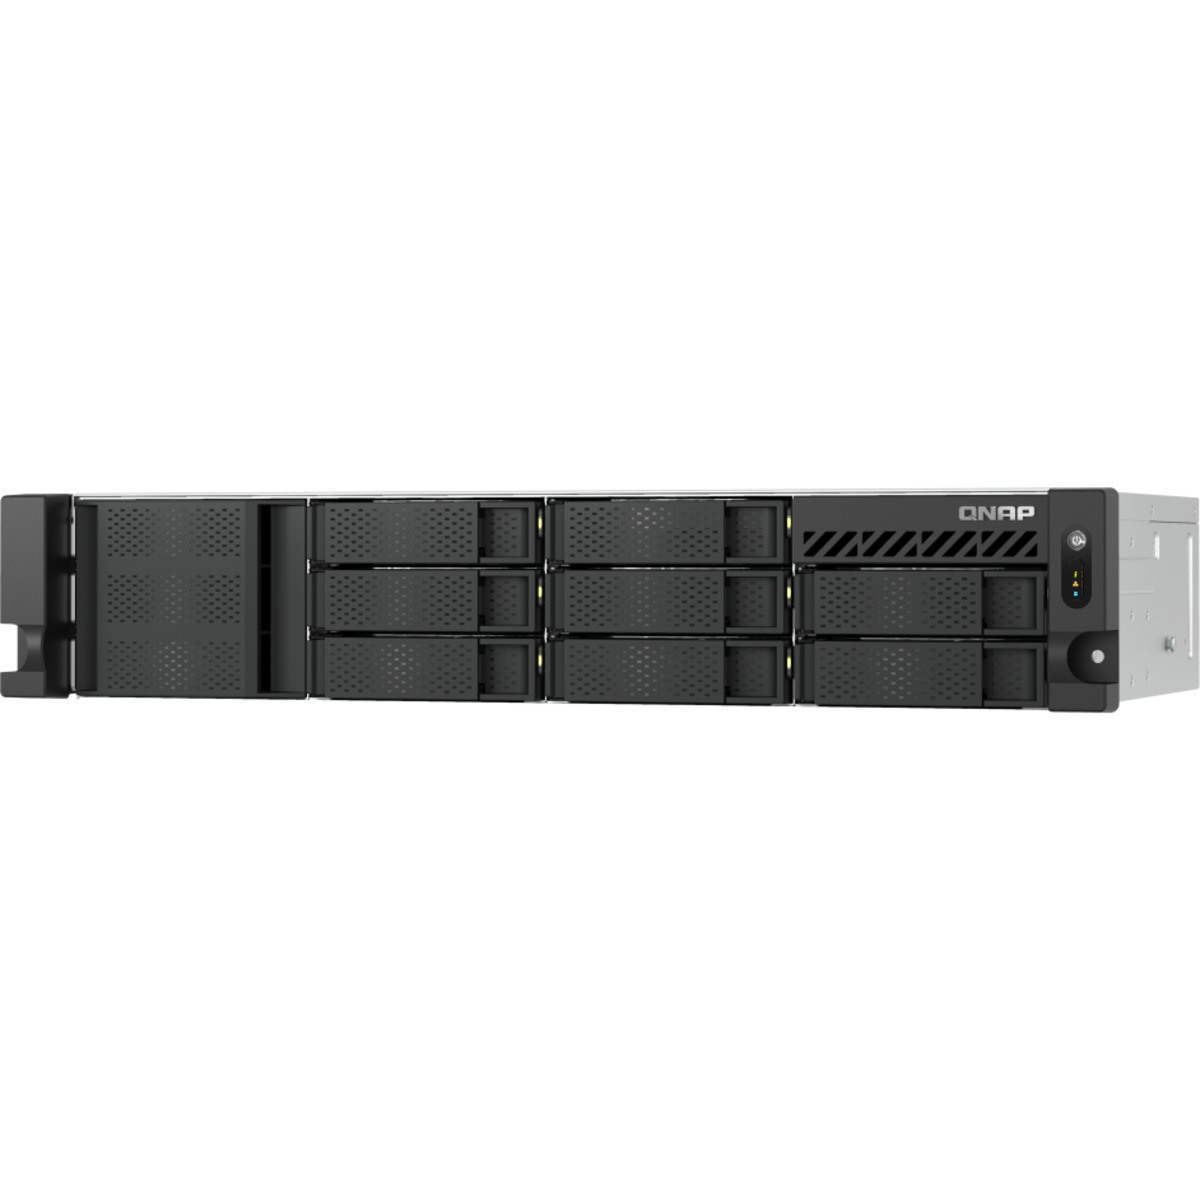 QNAP TS-855eU-RP 72tb 8-Bay RackMount Multimedia / Power User / Business NAS - Network Attached Storage Device 4x18tb Seagate EXOS X18 ST18000NM000J 3.5 7200rpm SATA 6Gb/s HDD ENTERPRISE Class Drives Installed - Burn-In Tested - FREE RAM UPGRADE TS-855eU-RP